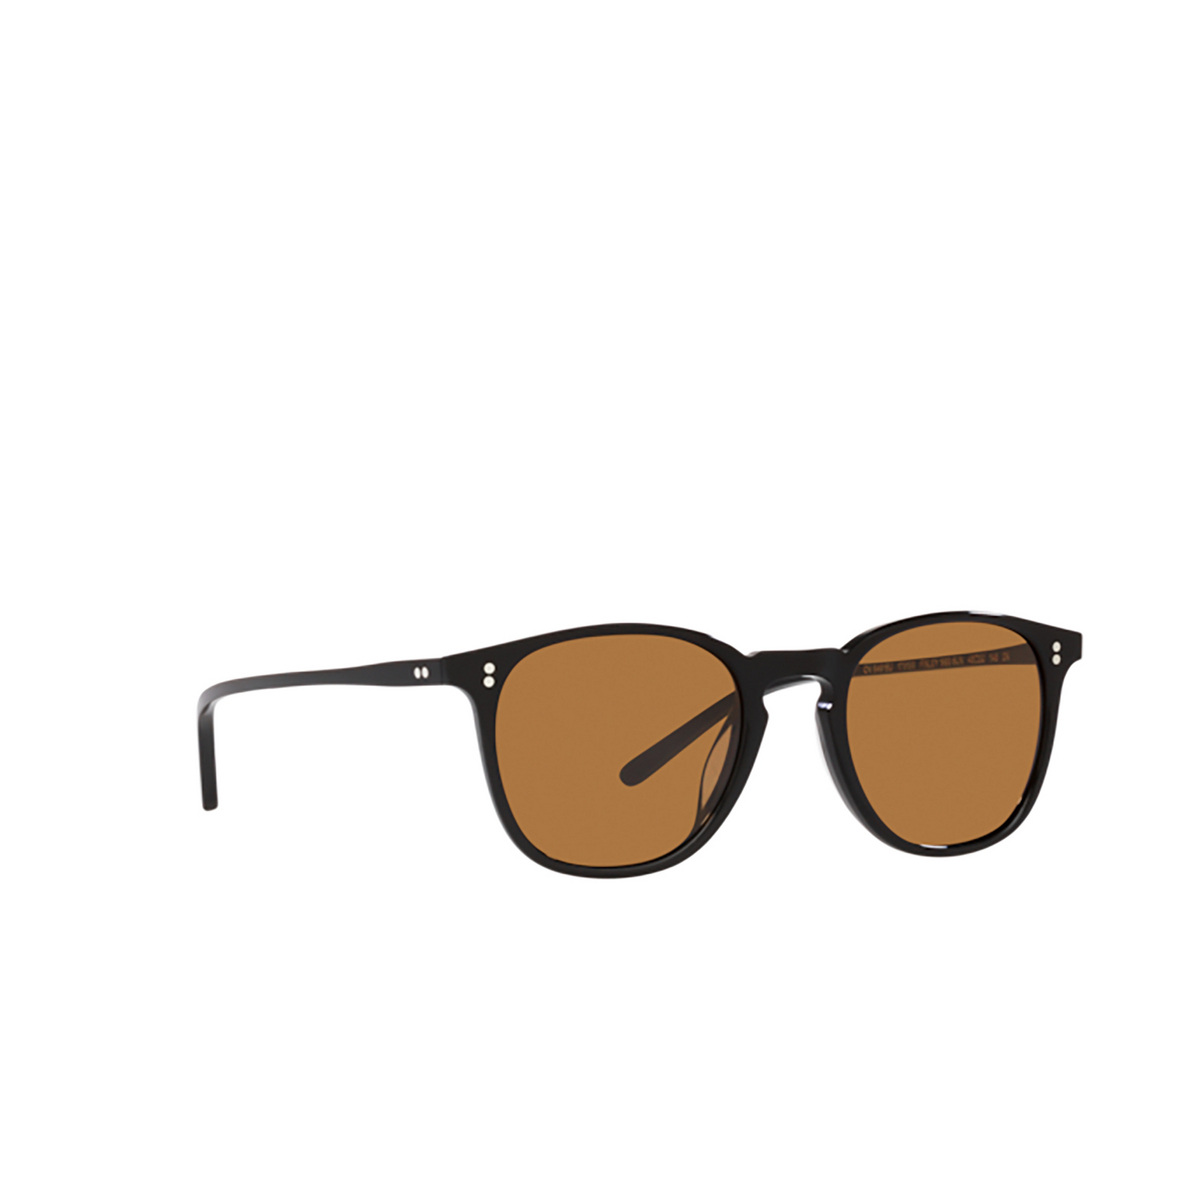 Oliver Peoples FINLEY 1993 Sunglasses 173153 Black - three-quarters view